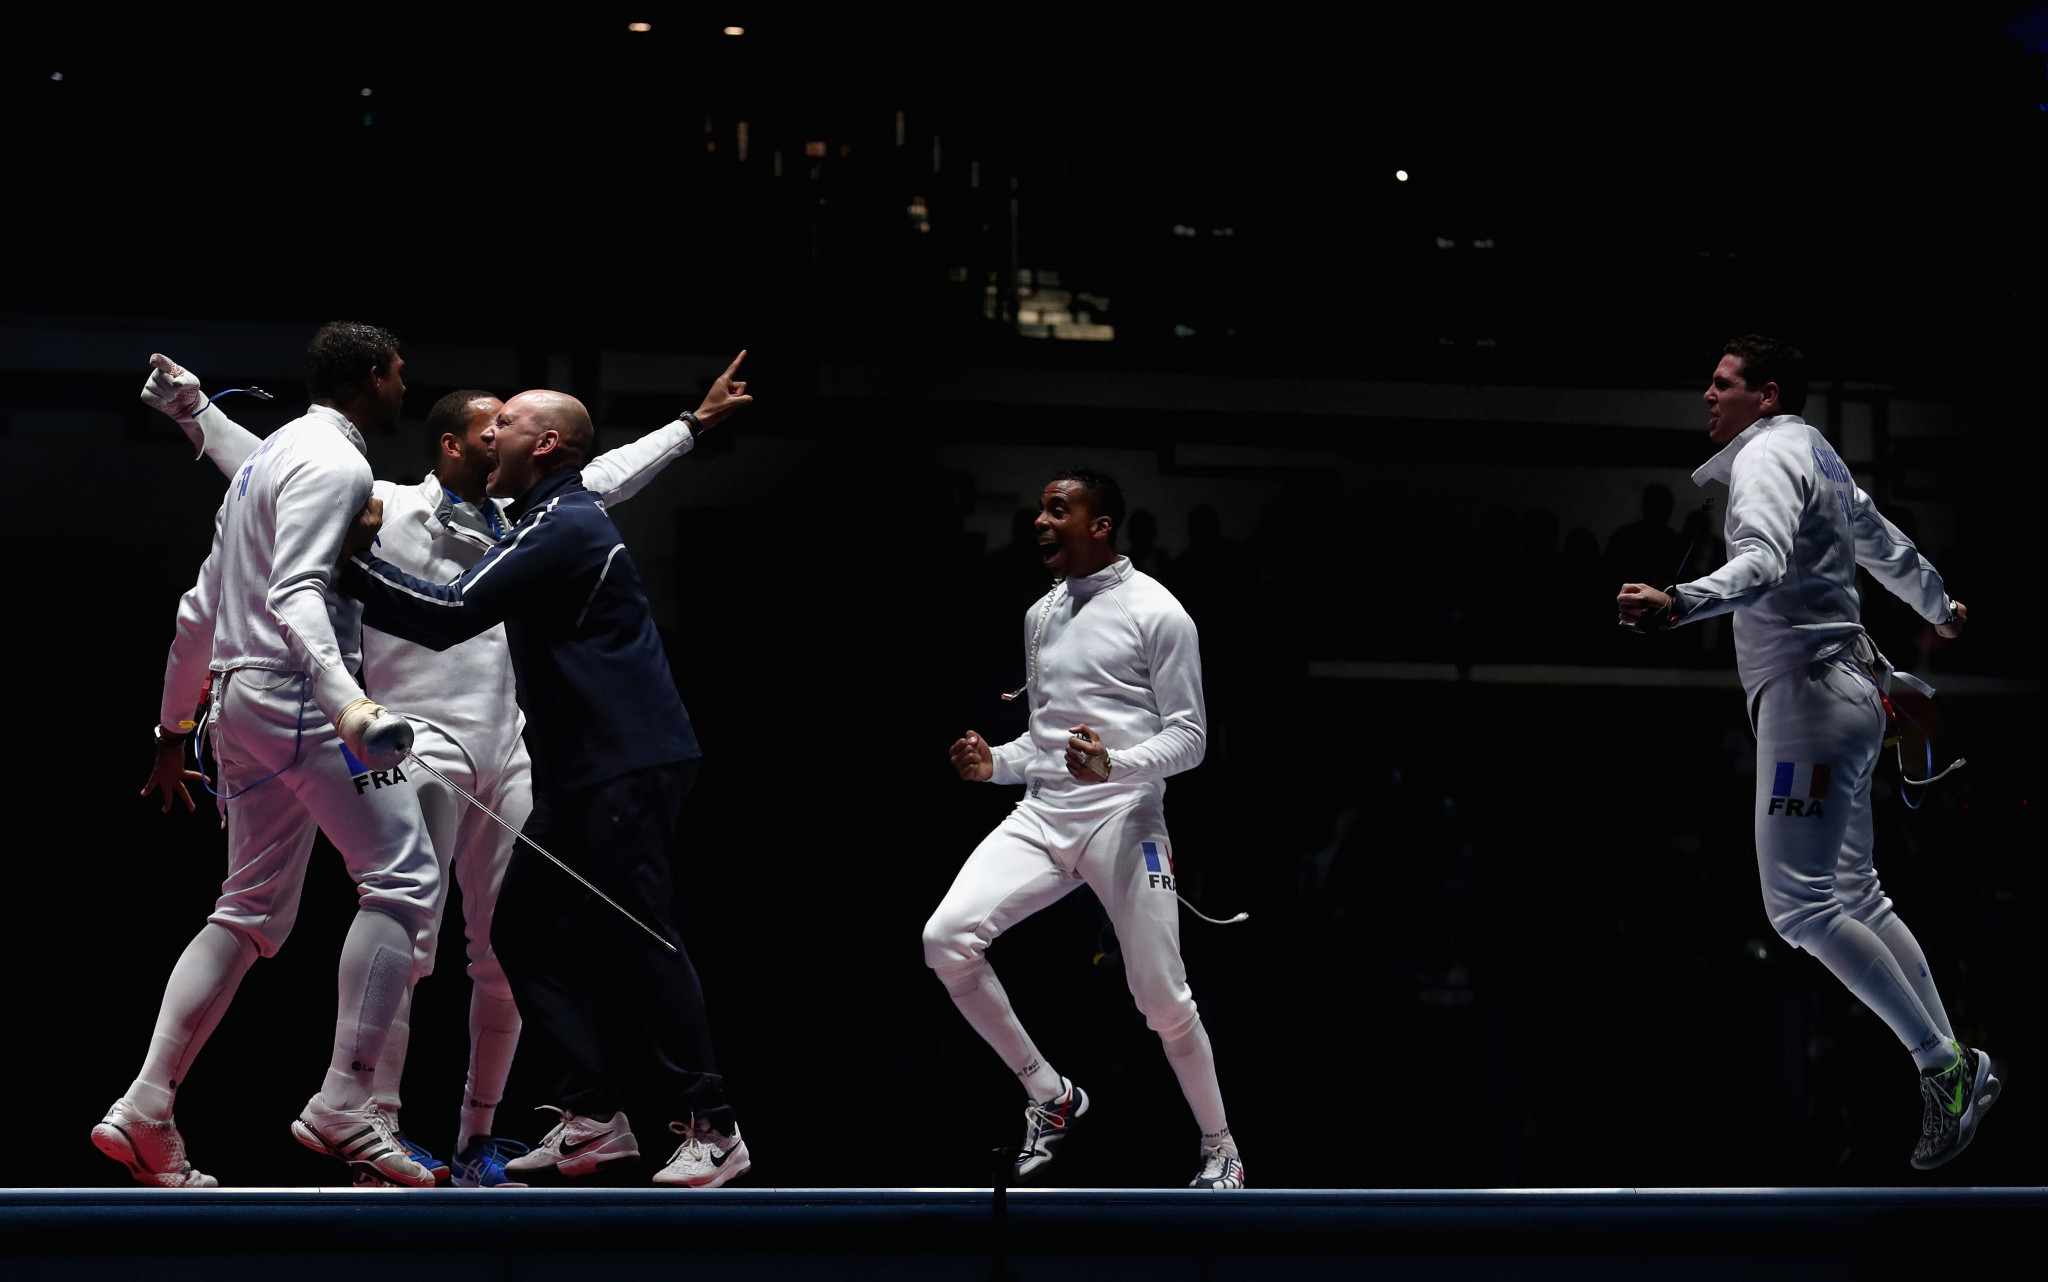 There will be a full quota of fencing team events at Tokyo 2020 ©Getty Images